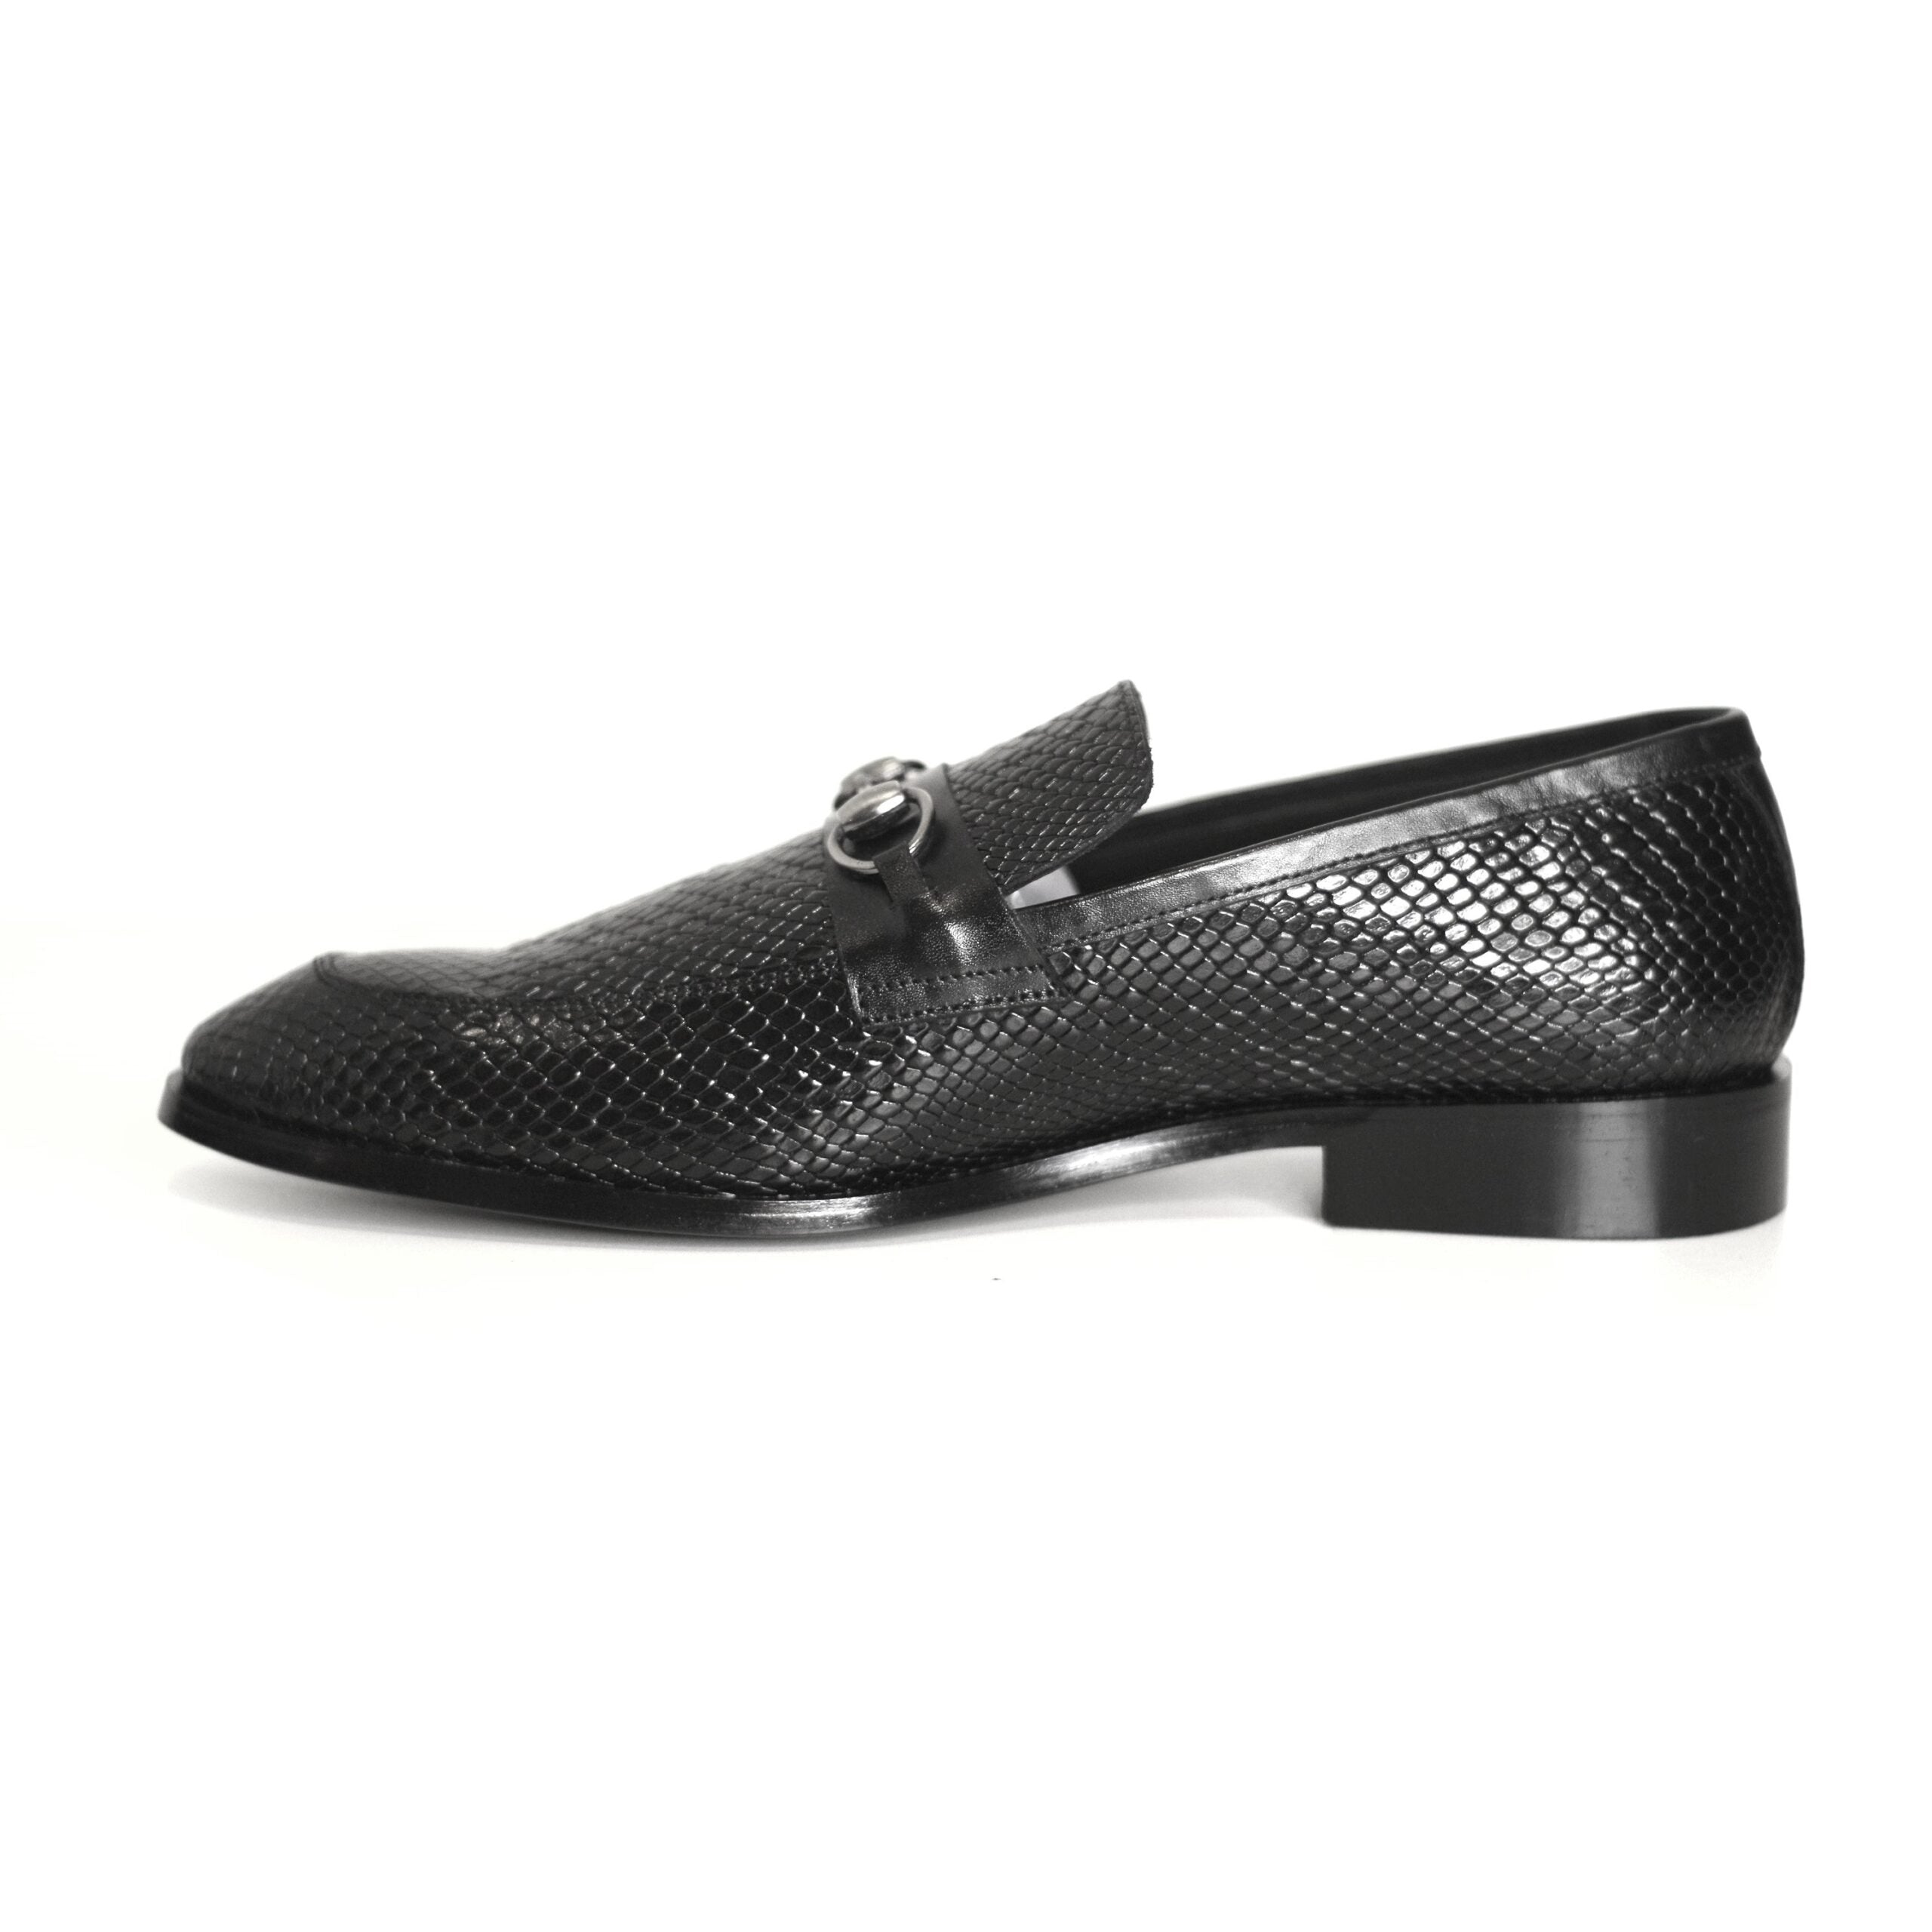 Black Glossy Color Faux Snake-Skin Design Hand-Crafted Emperor Shoes/Loafers For Men